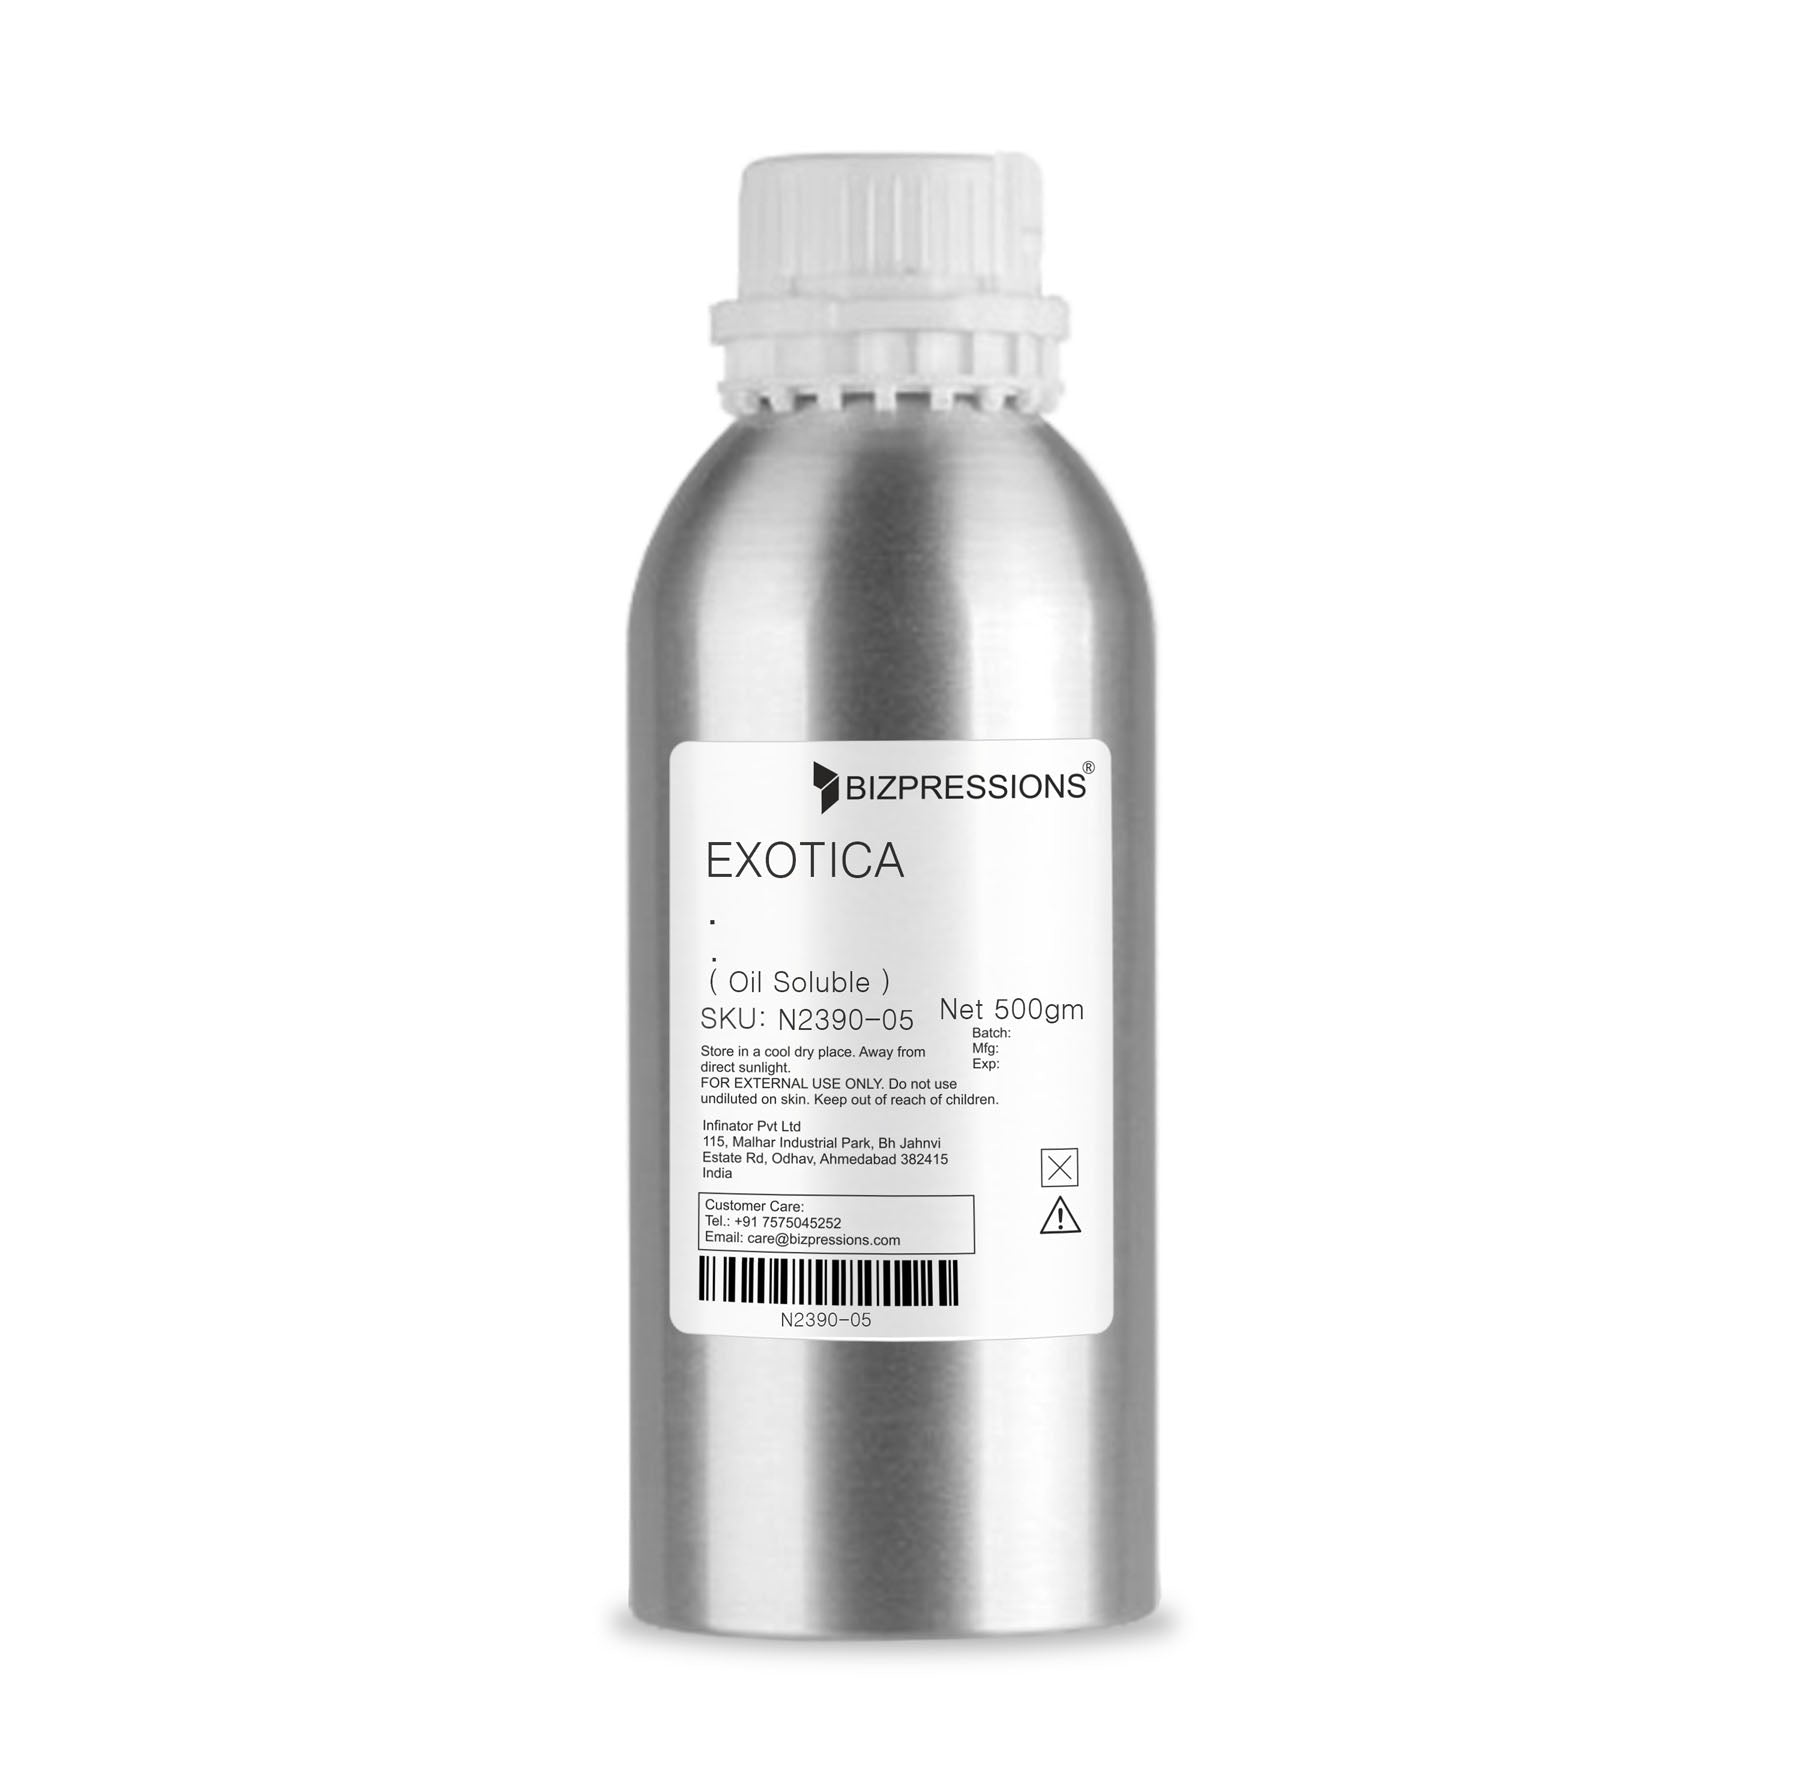 EXOTICA - Fragrance ( Oil Soluble ) - 500 gm